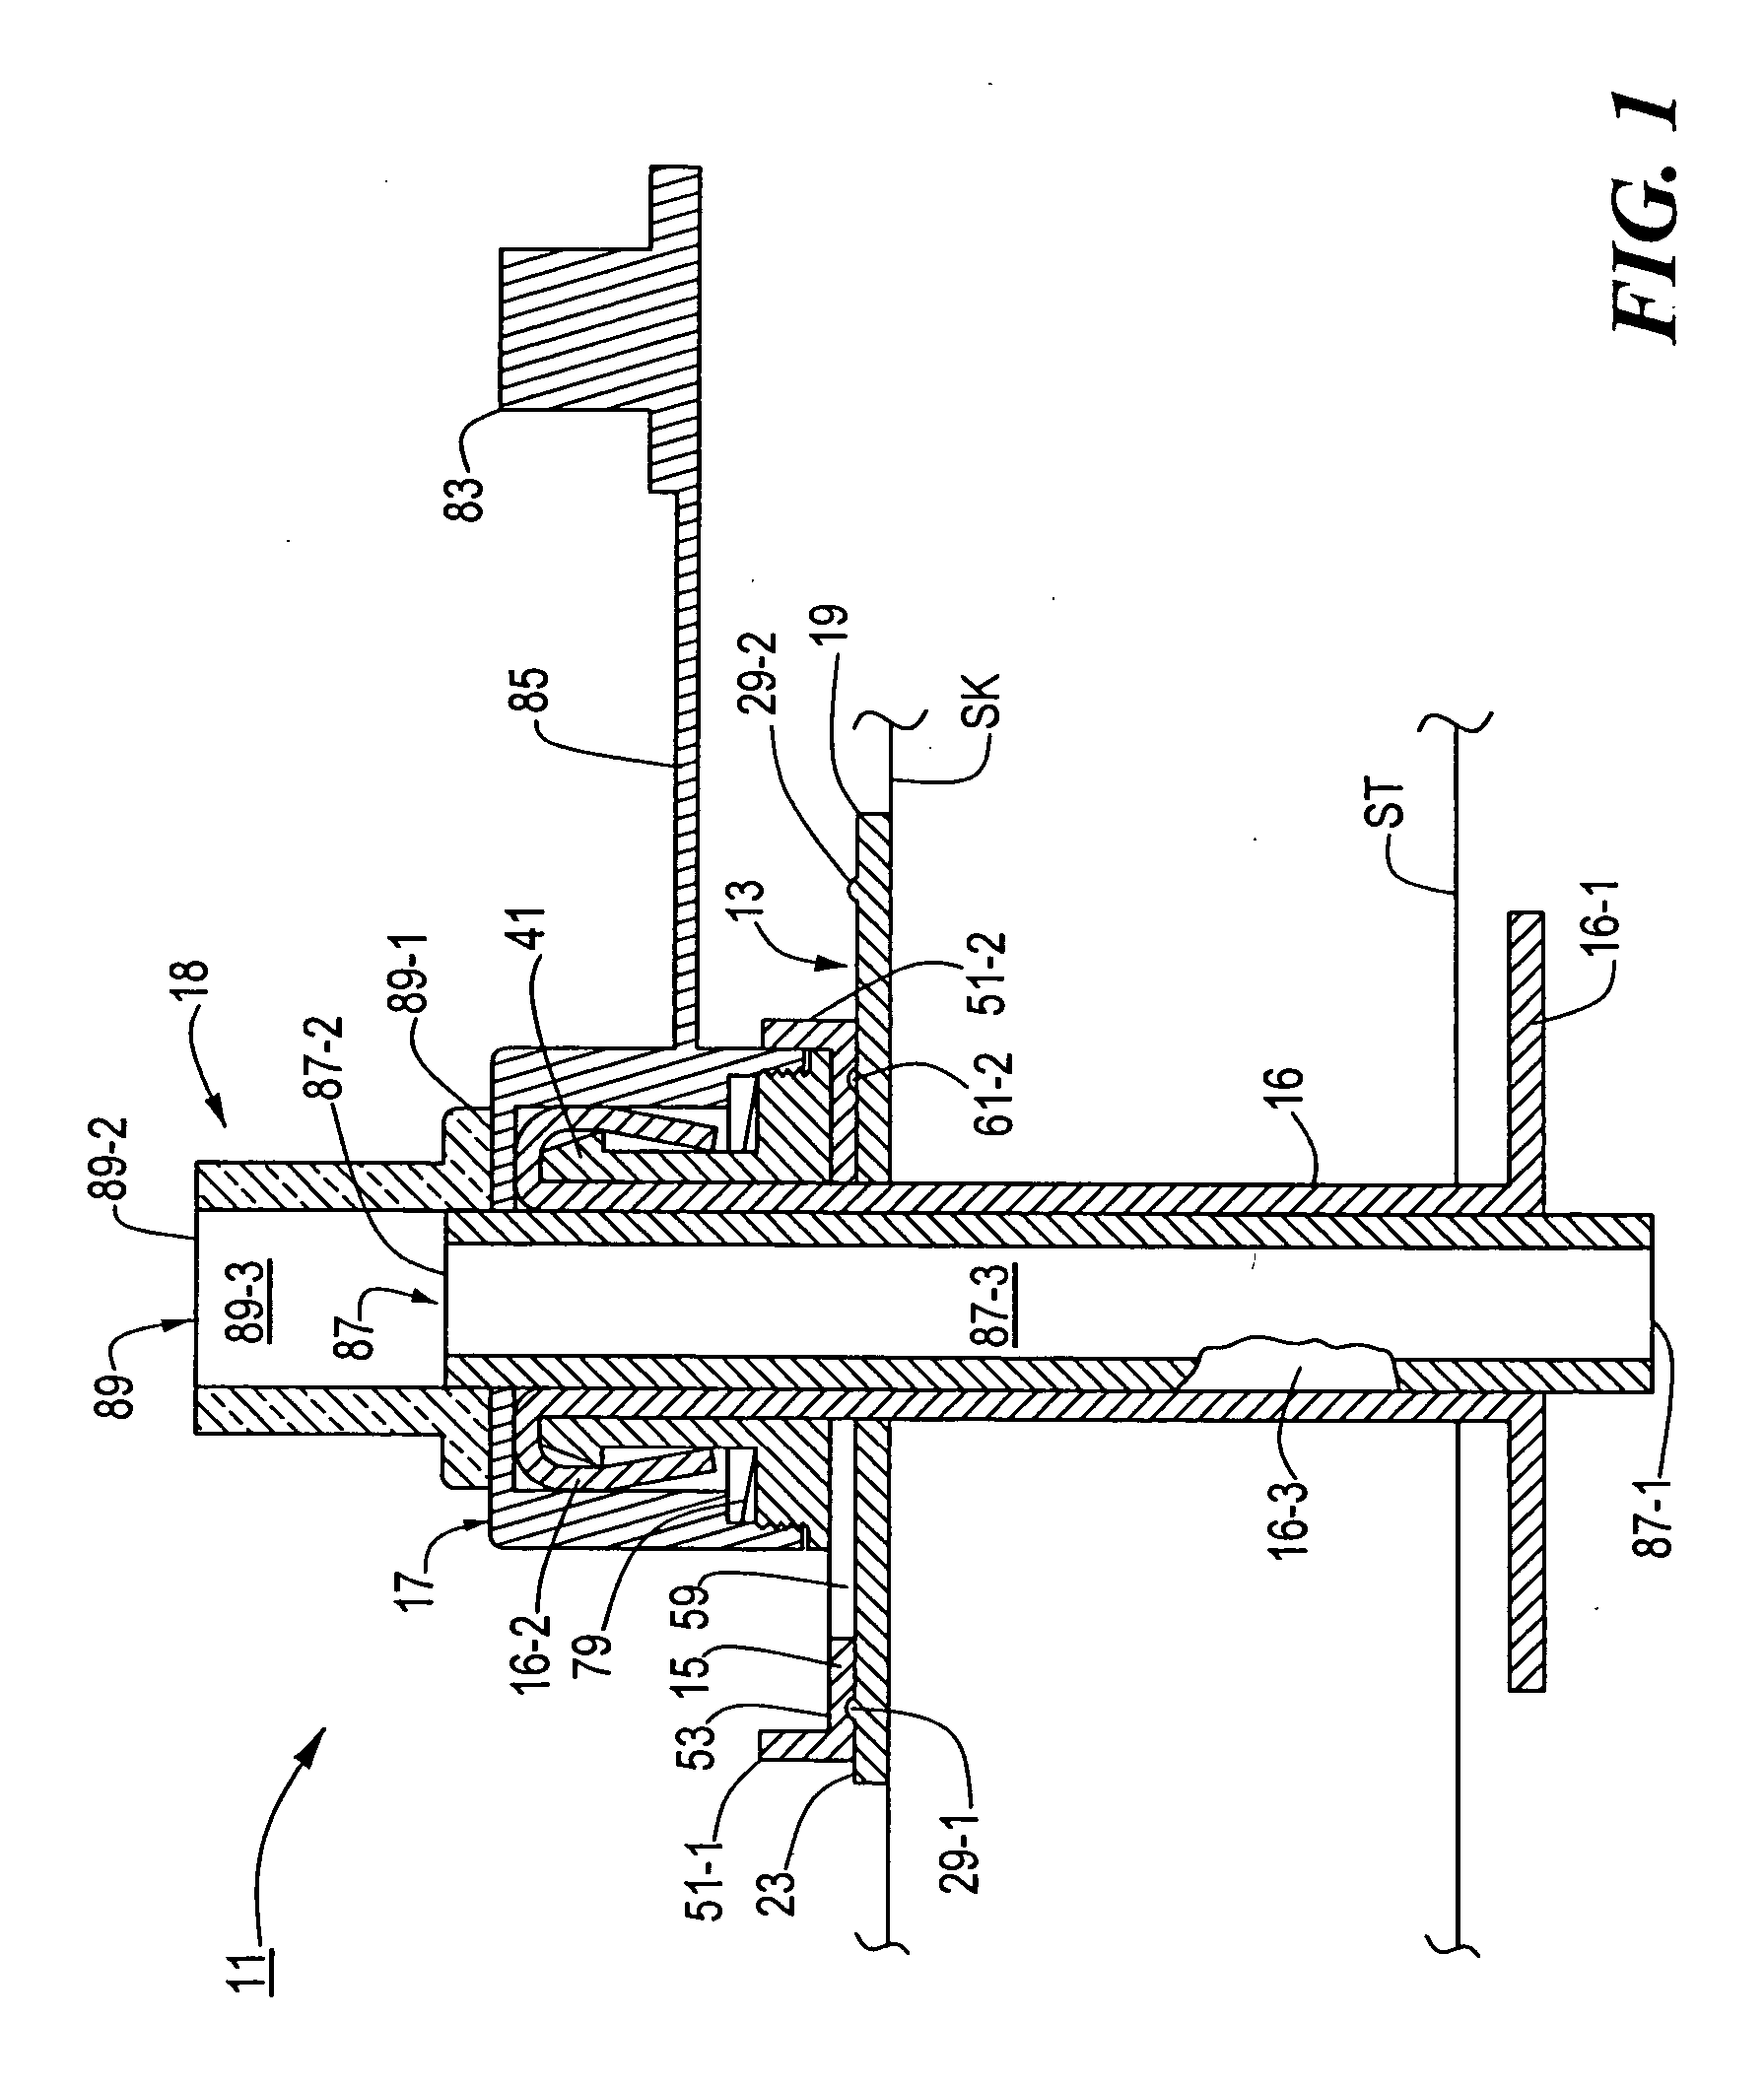 Medical catheter assembly including a removable inner sleeve and method of using the same